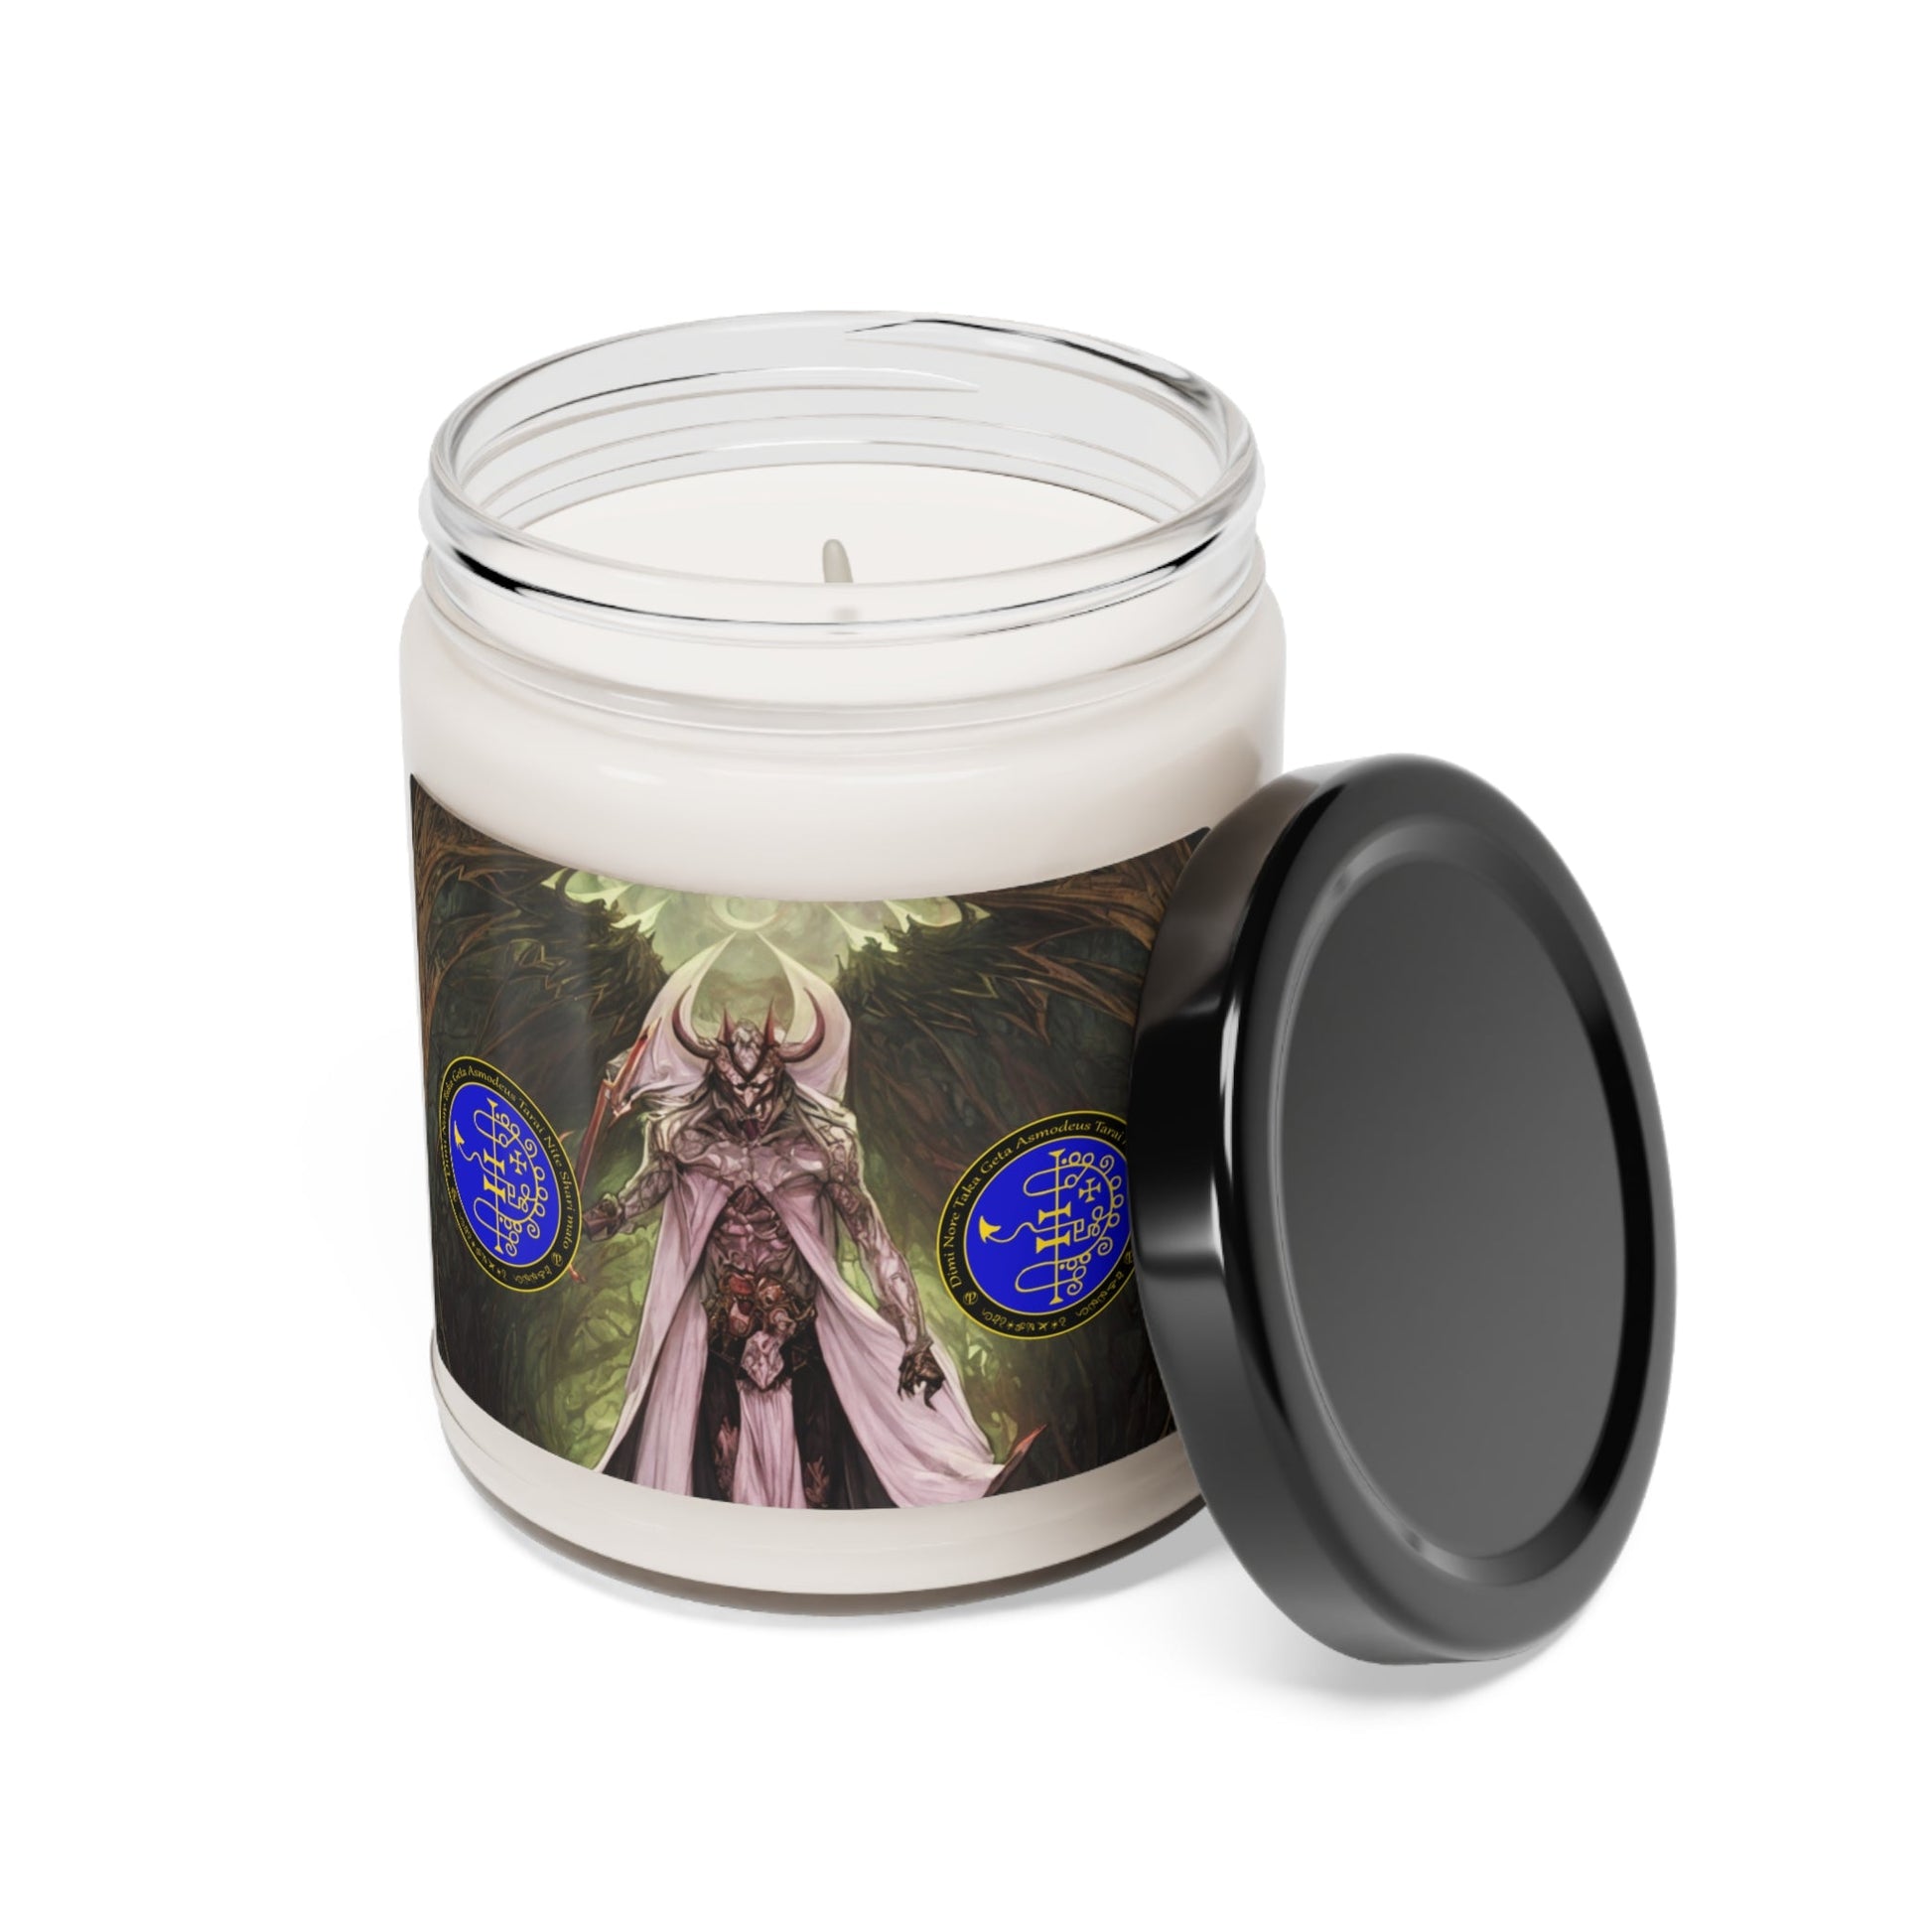 Demon-Asmodeus-oltar-Soy-Scented-Soy Candle-for-Gamble-related-offerings-rituals-inicijations-or-praying-and-meditation-2